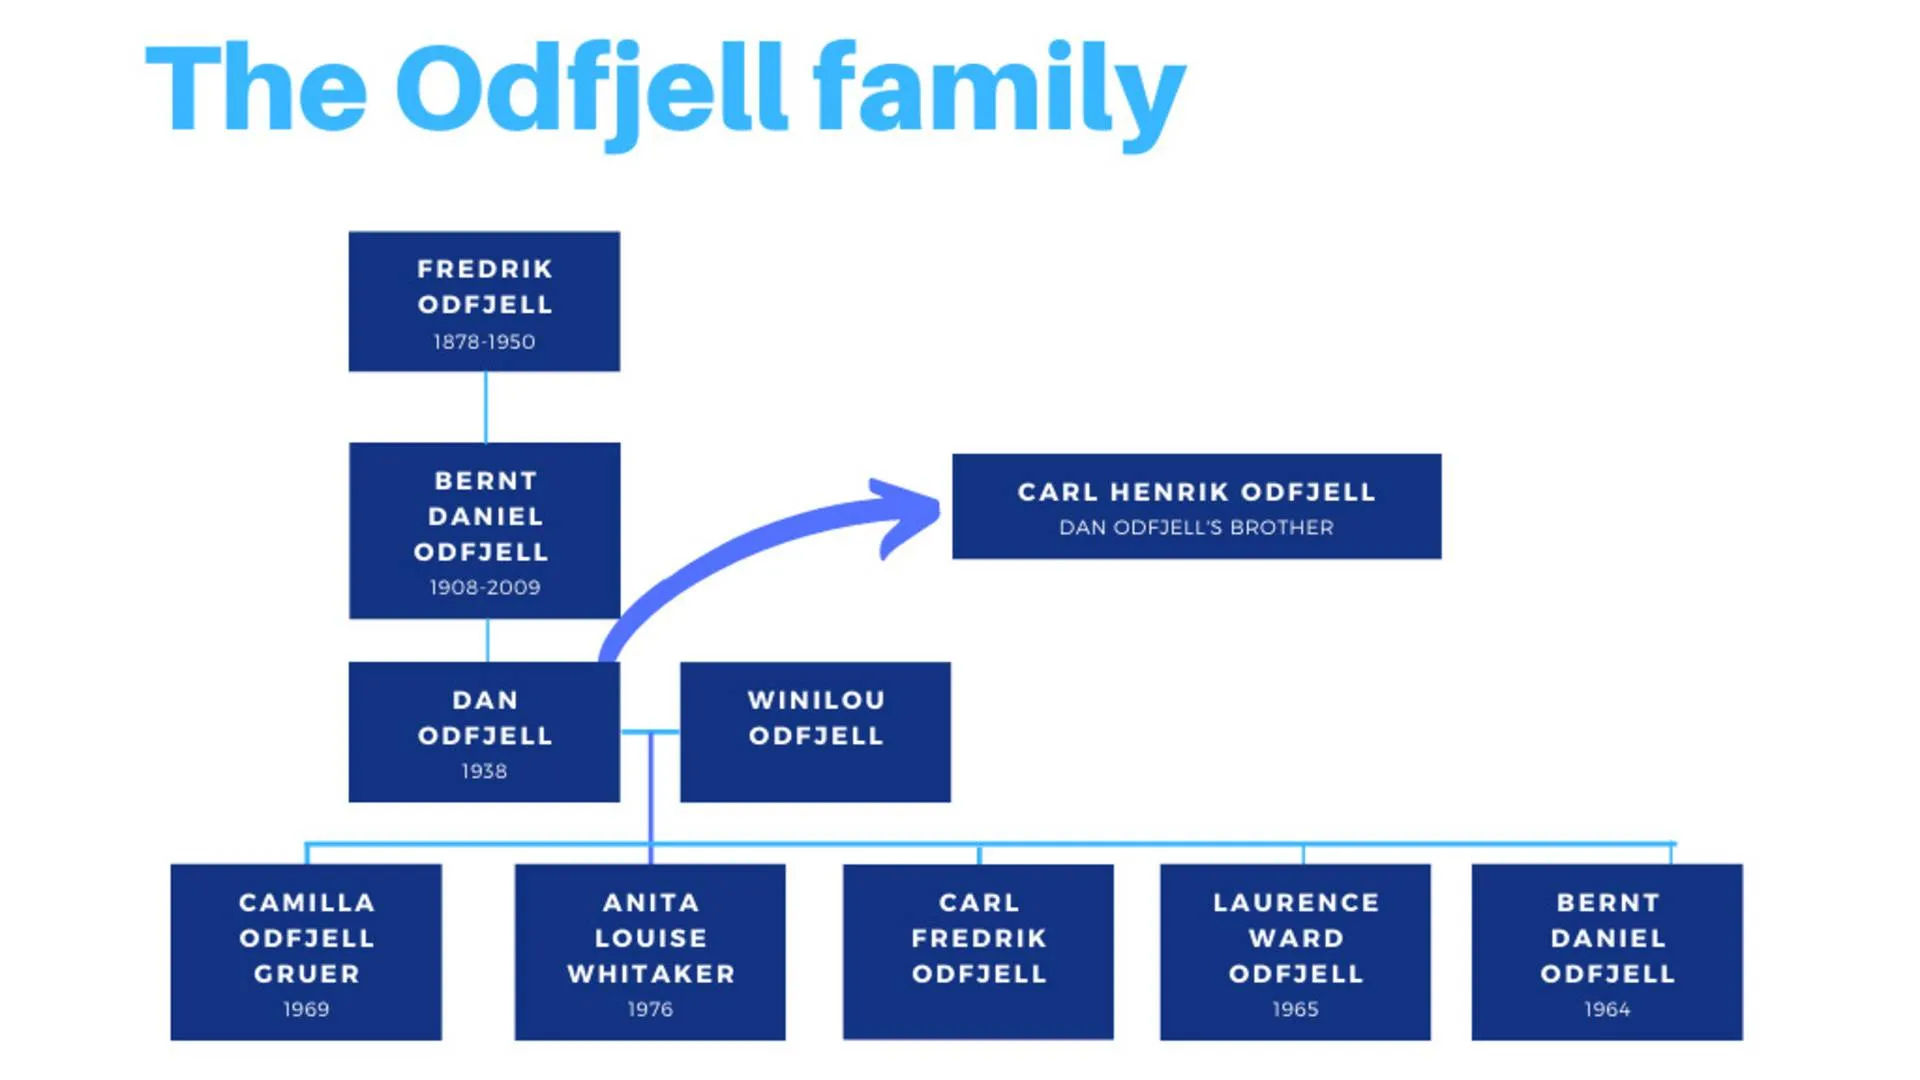 Family ties are Odfjell's best defense against Stolt-Nielsen acquisition